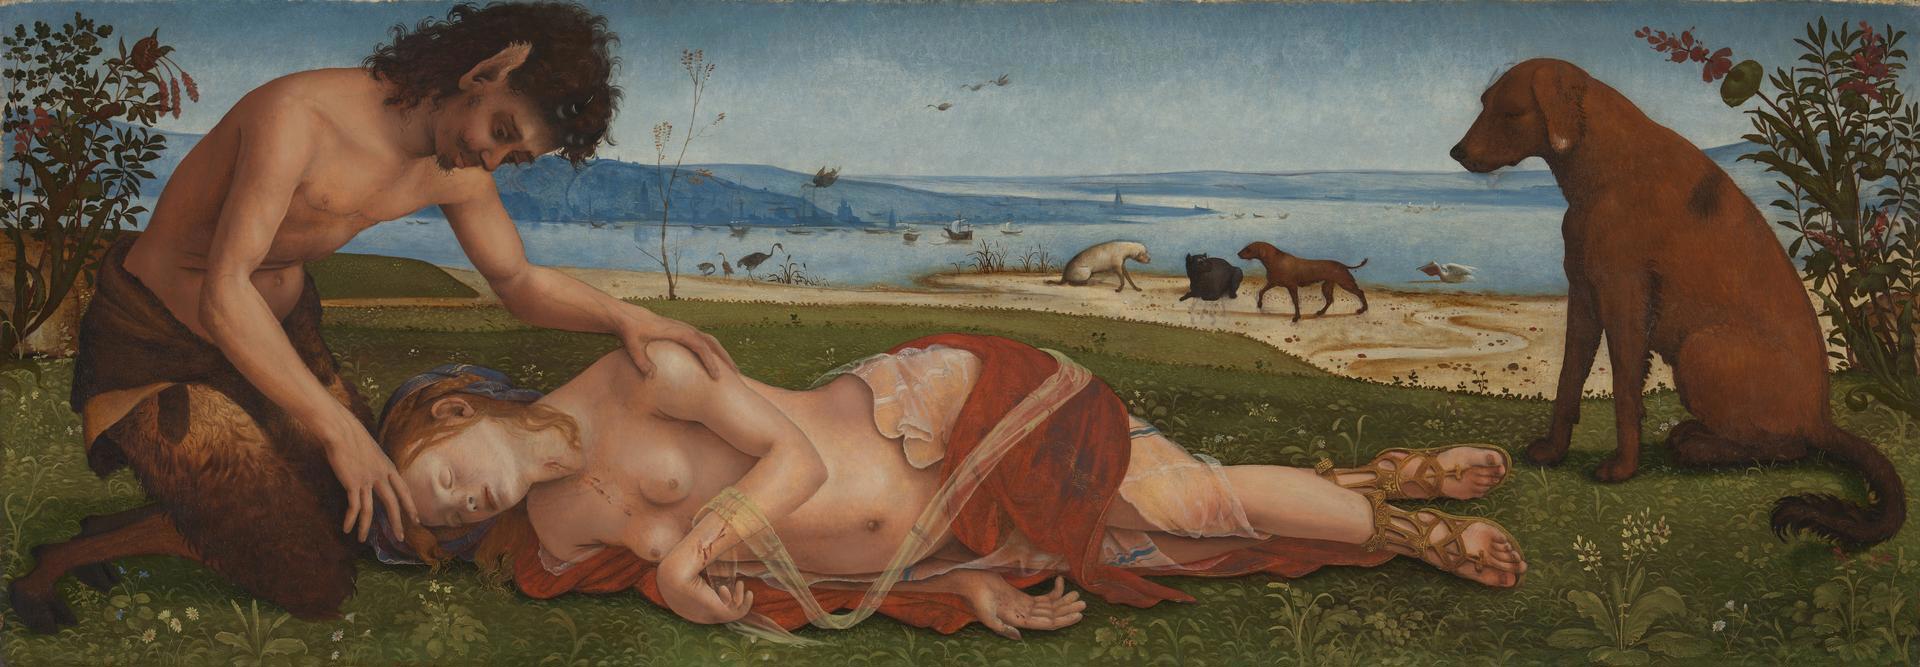 A Satyr mourning over a Nymph by Piero di Cosimo